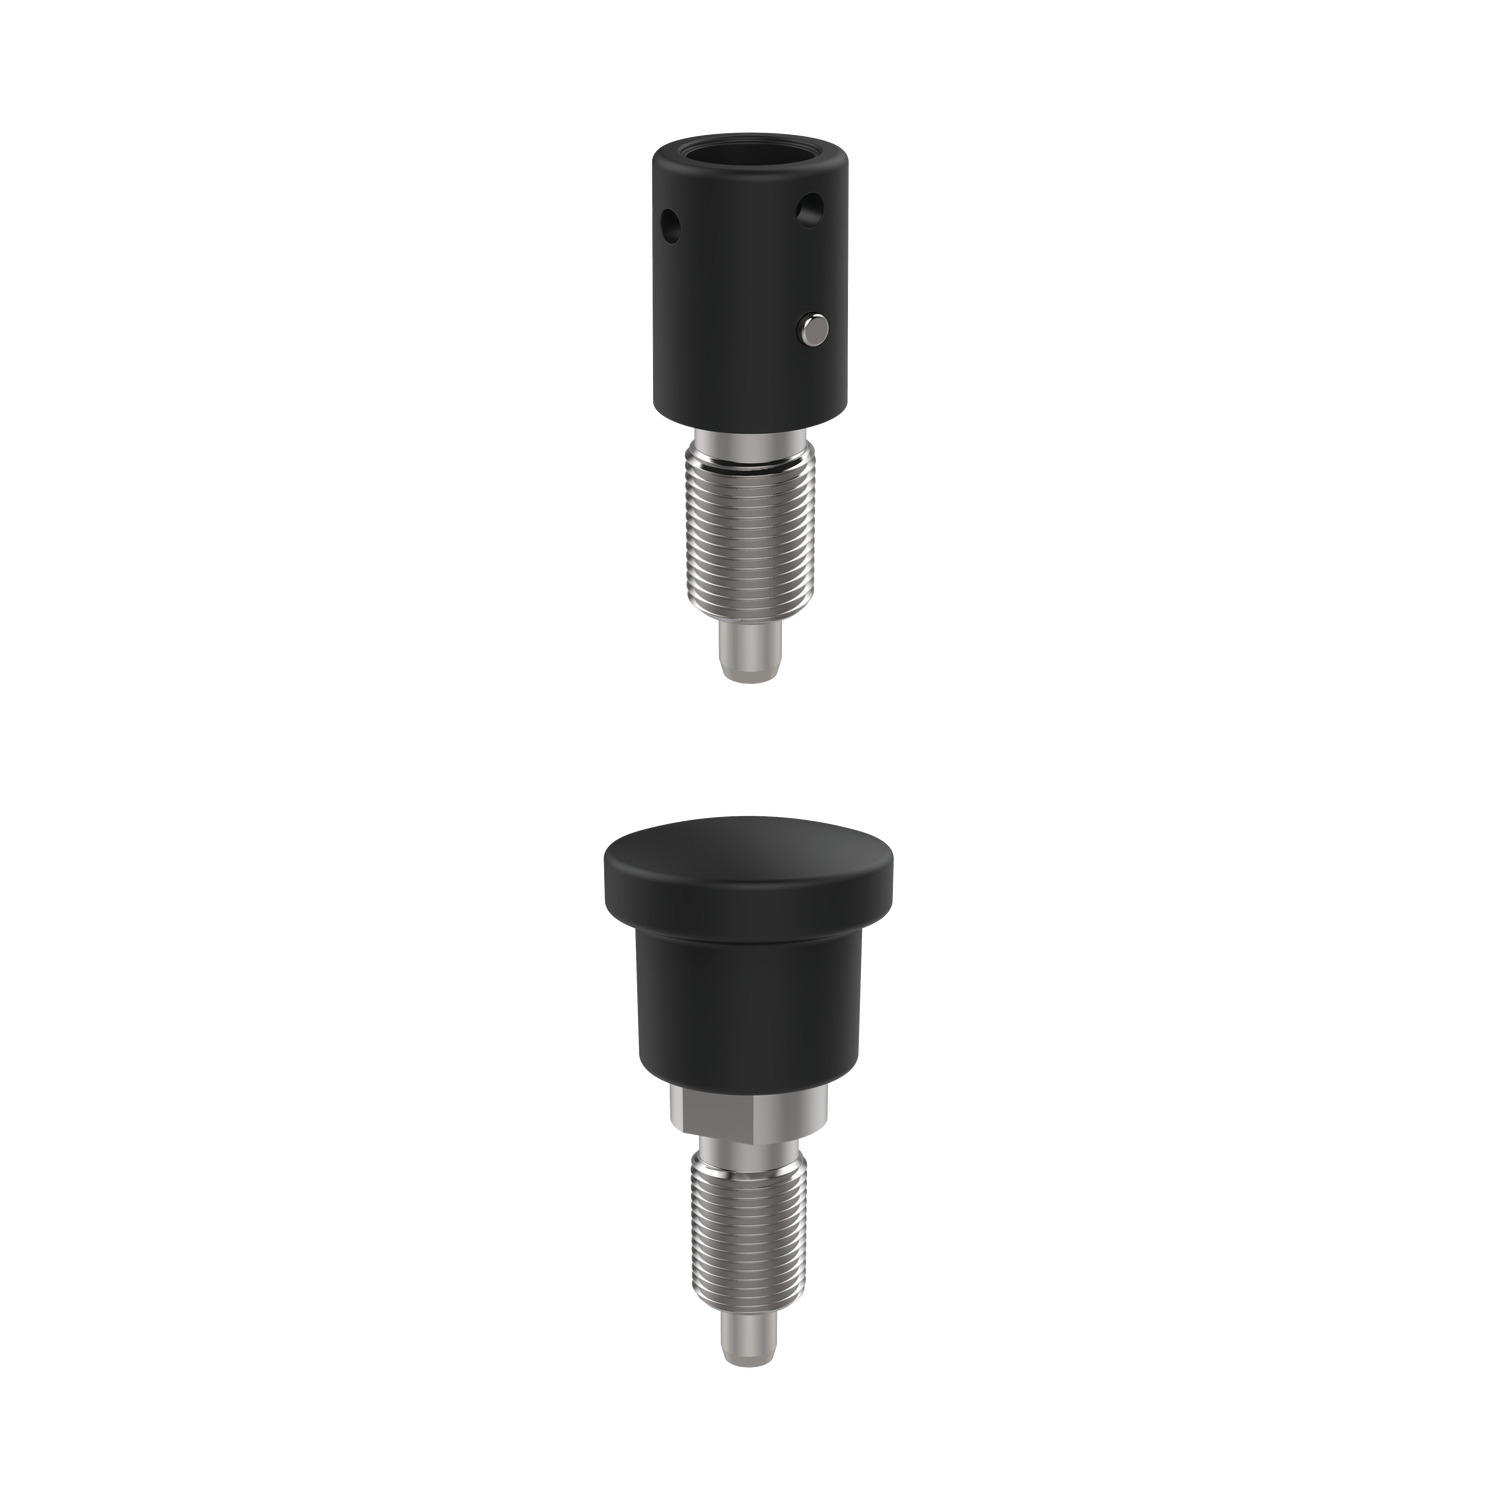 32781.W0028 Safety Index Plunger With Tamper Resistant Feature. M16 for safety key.  standard - locking pin protruding at start position, Material: Steel.